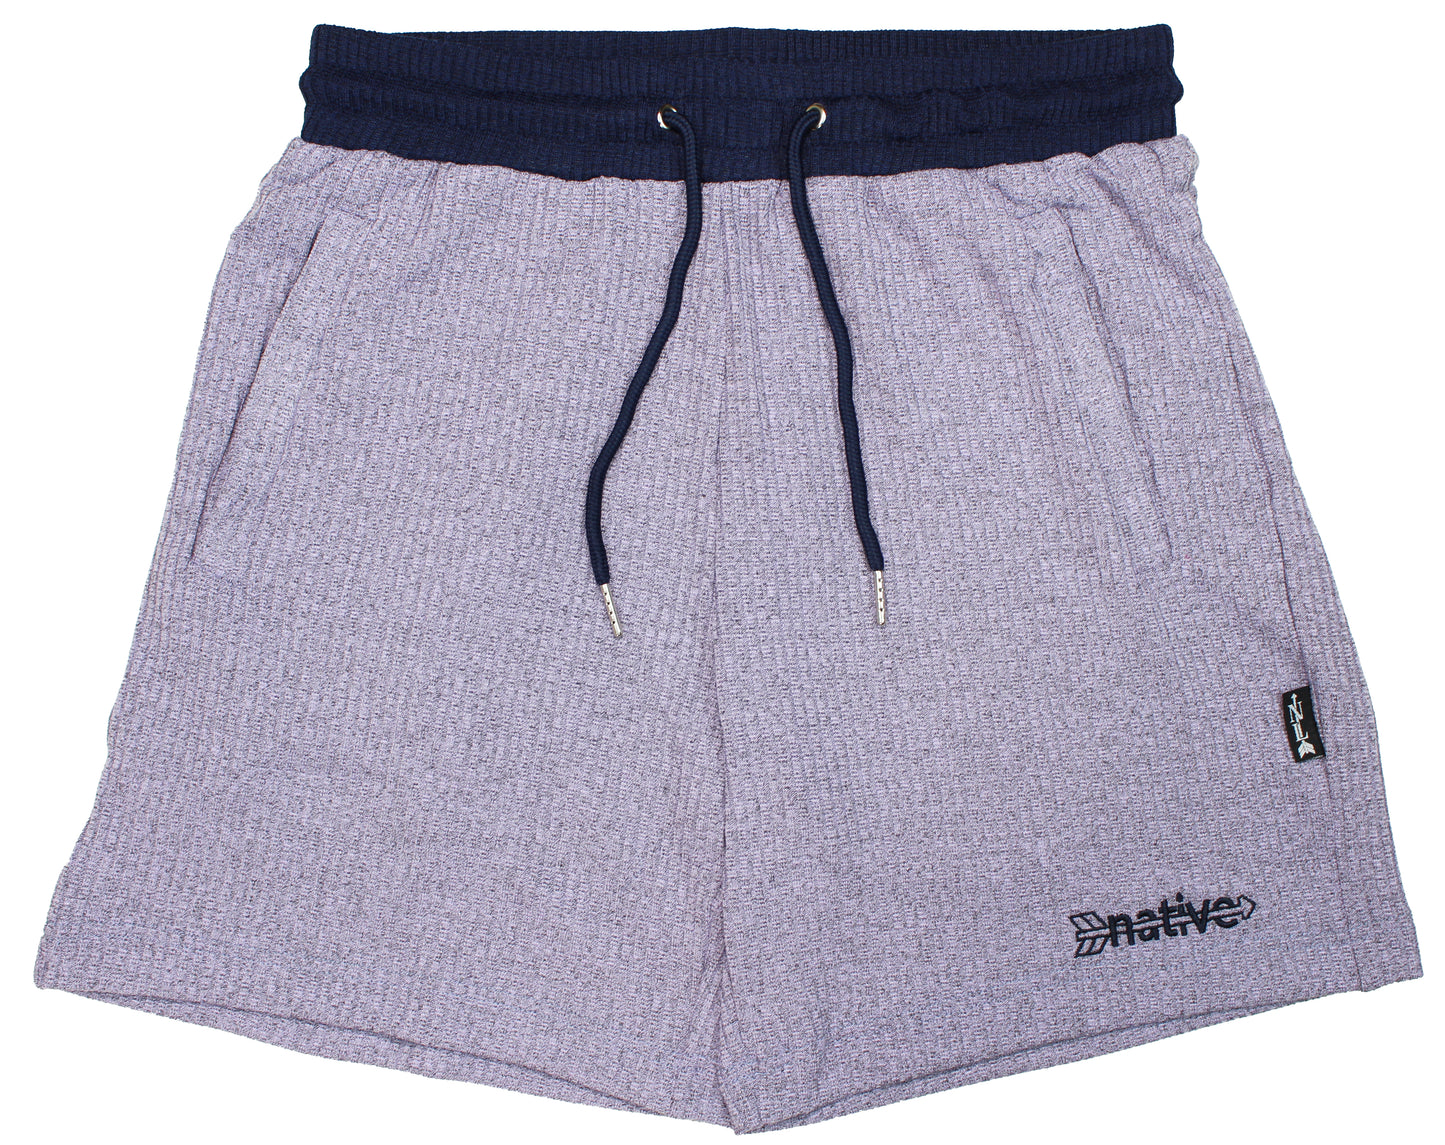 knit shorts in periwinkle